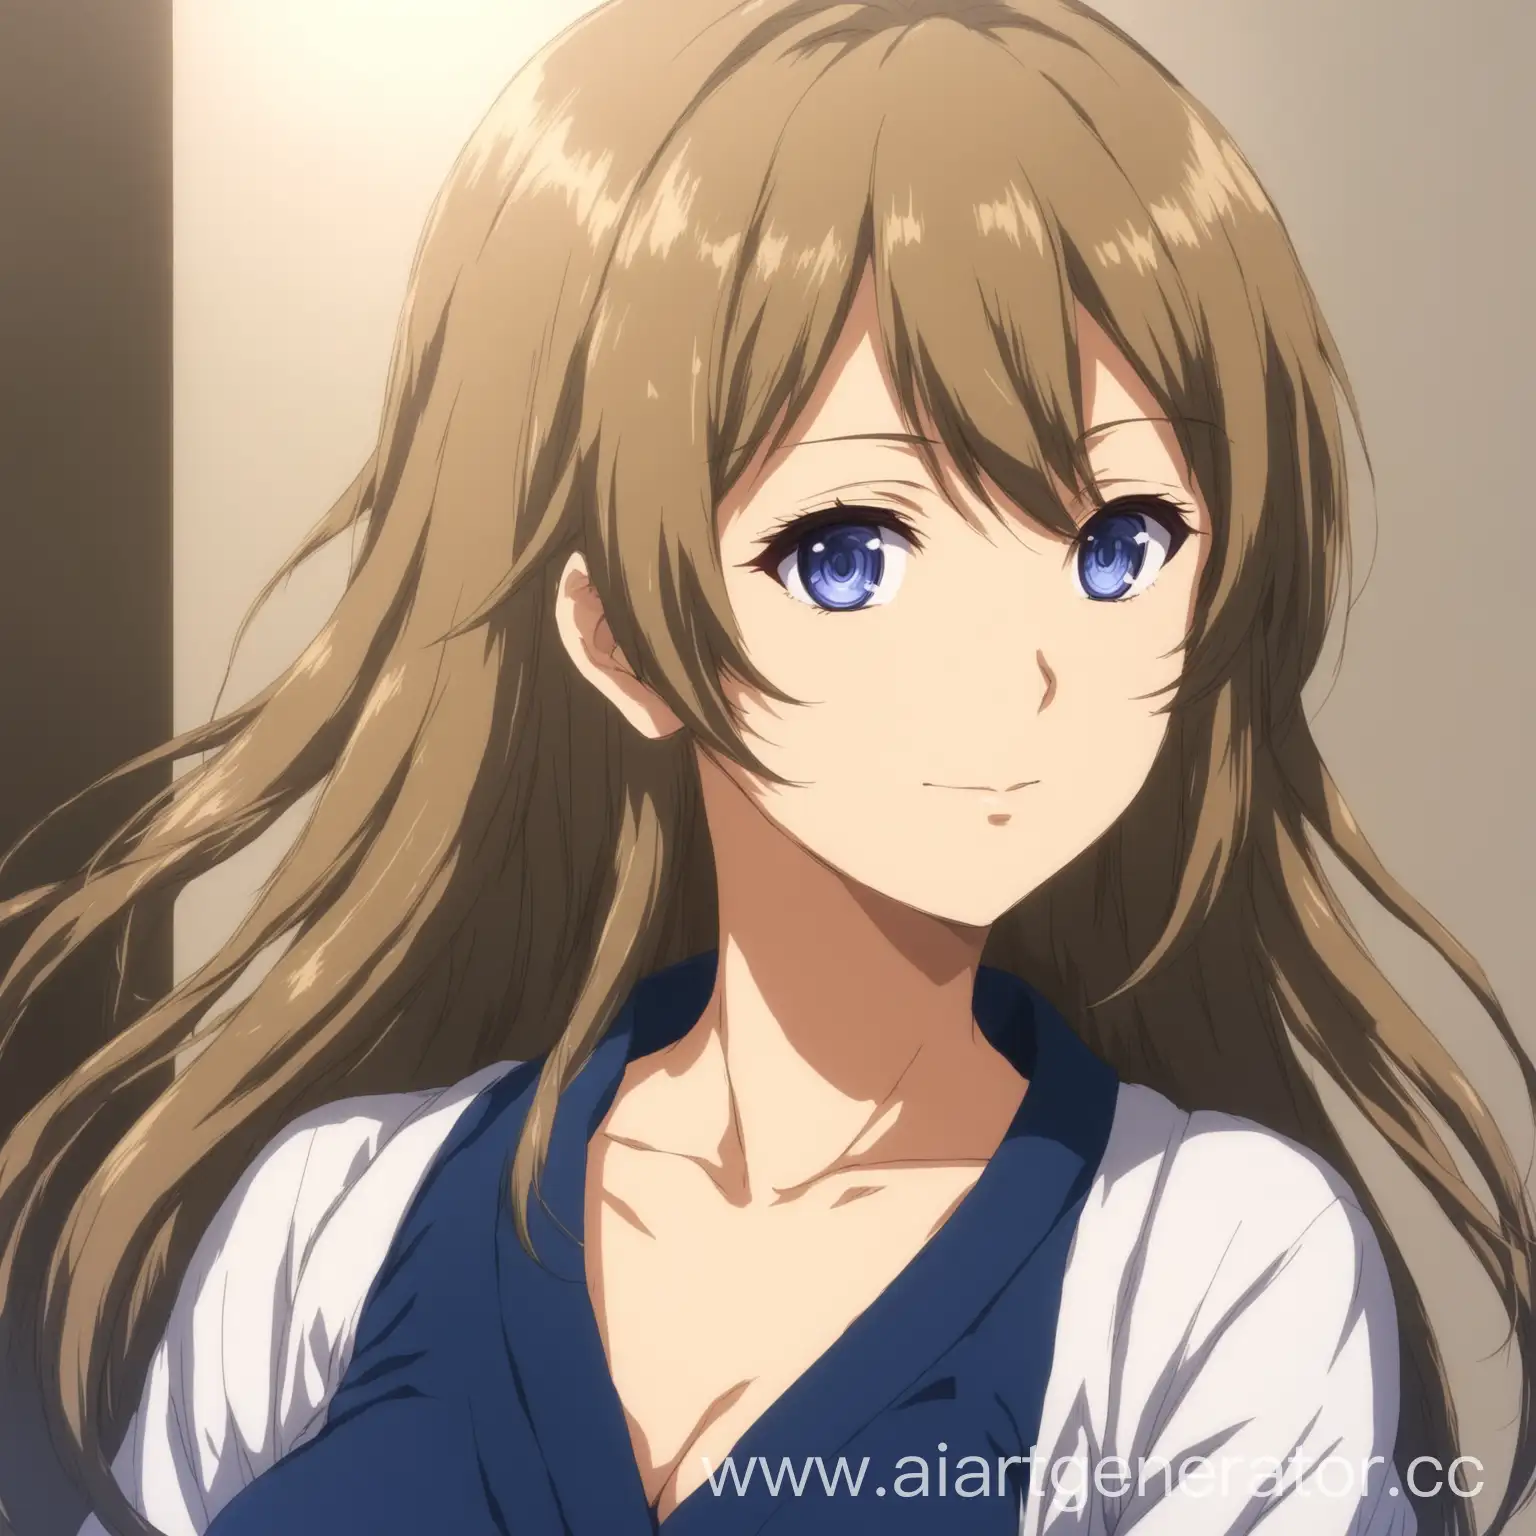 Elegant-Mature-Anime-Woman-Portrait-Graceful-Anime-Character-in-her-Forties